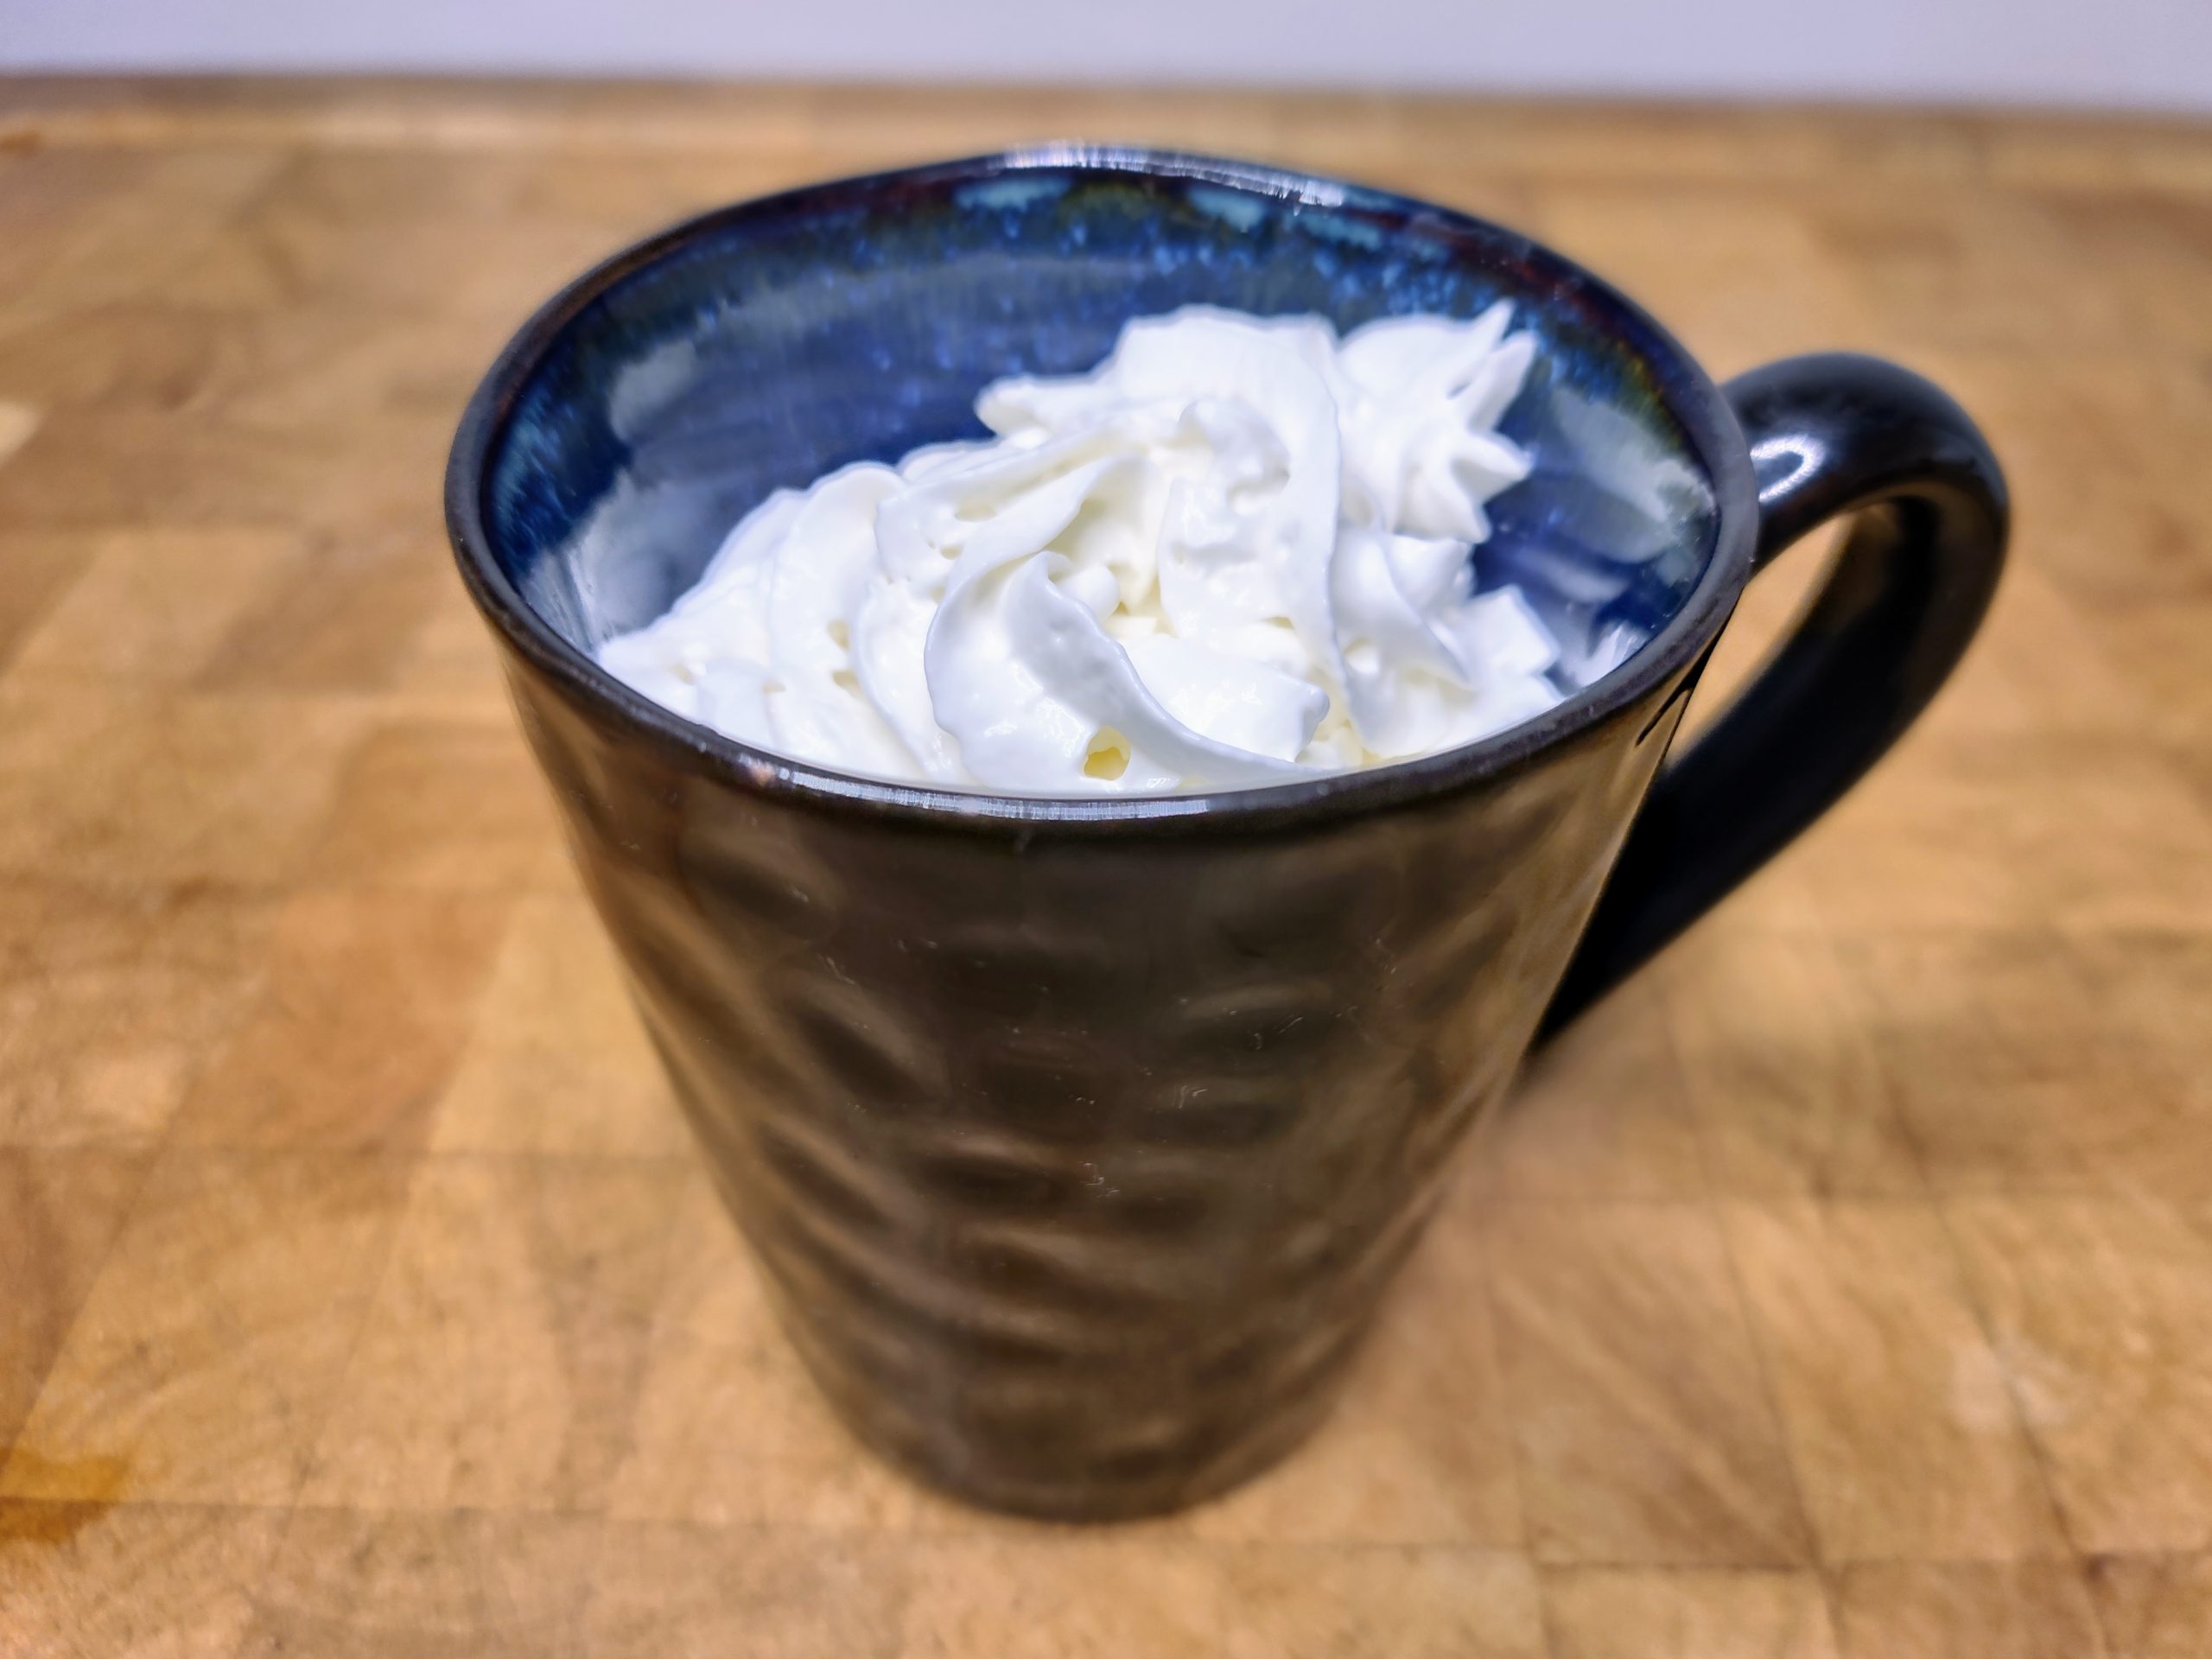 Rumplemintz hot chocolate in a blue mug topped with whipped cream.